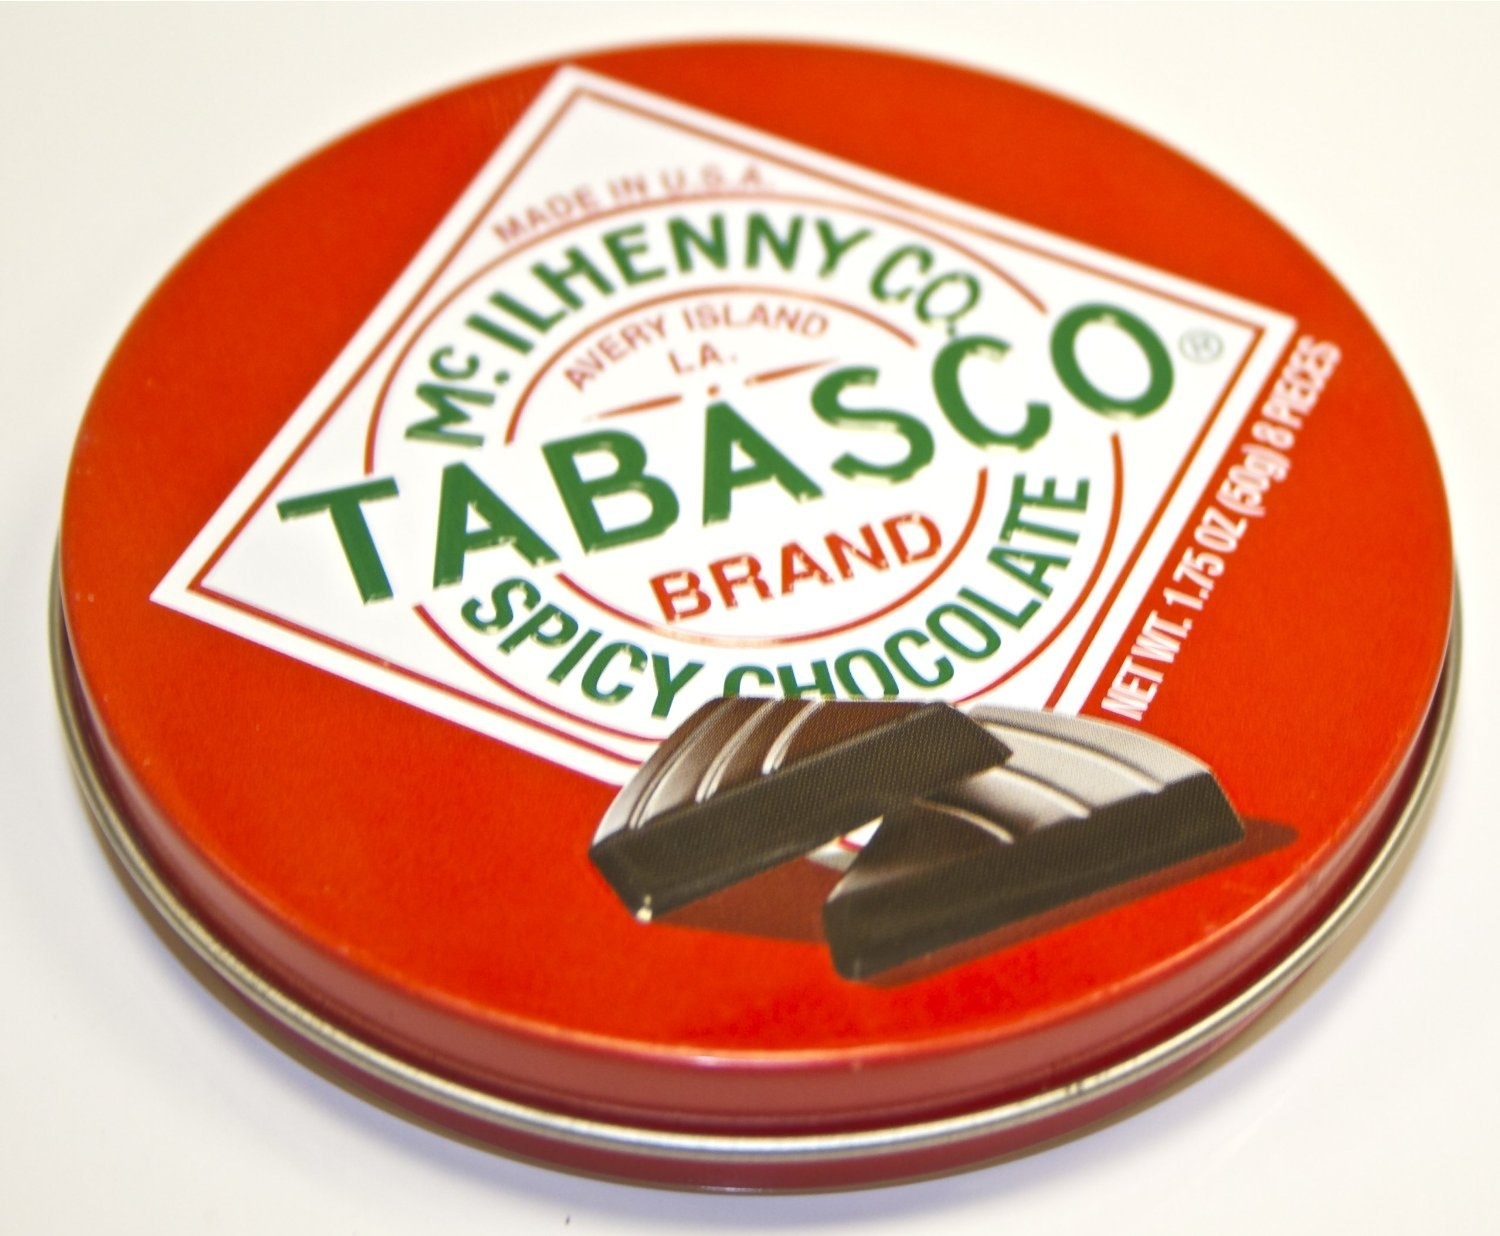 Circular red tin of Tabasco spicy chocolate